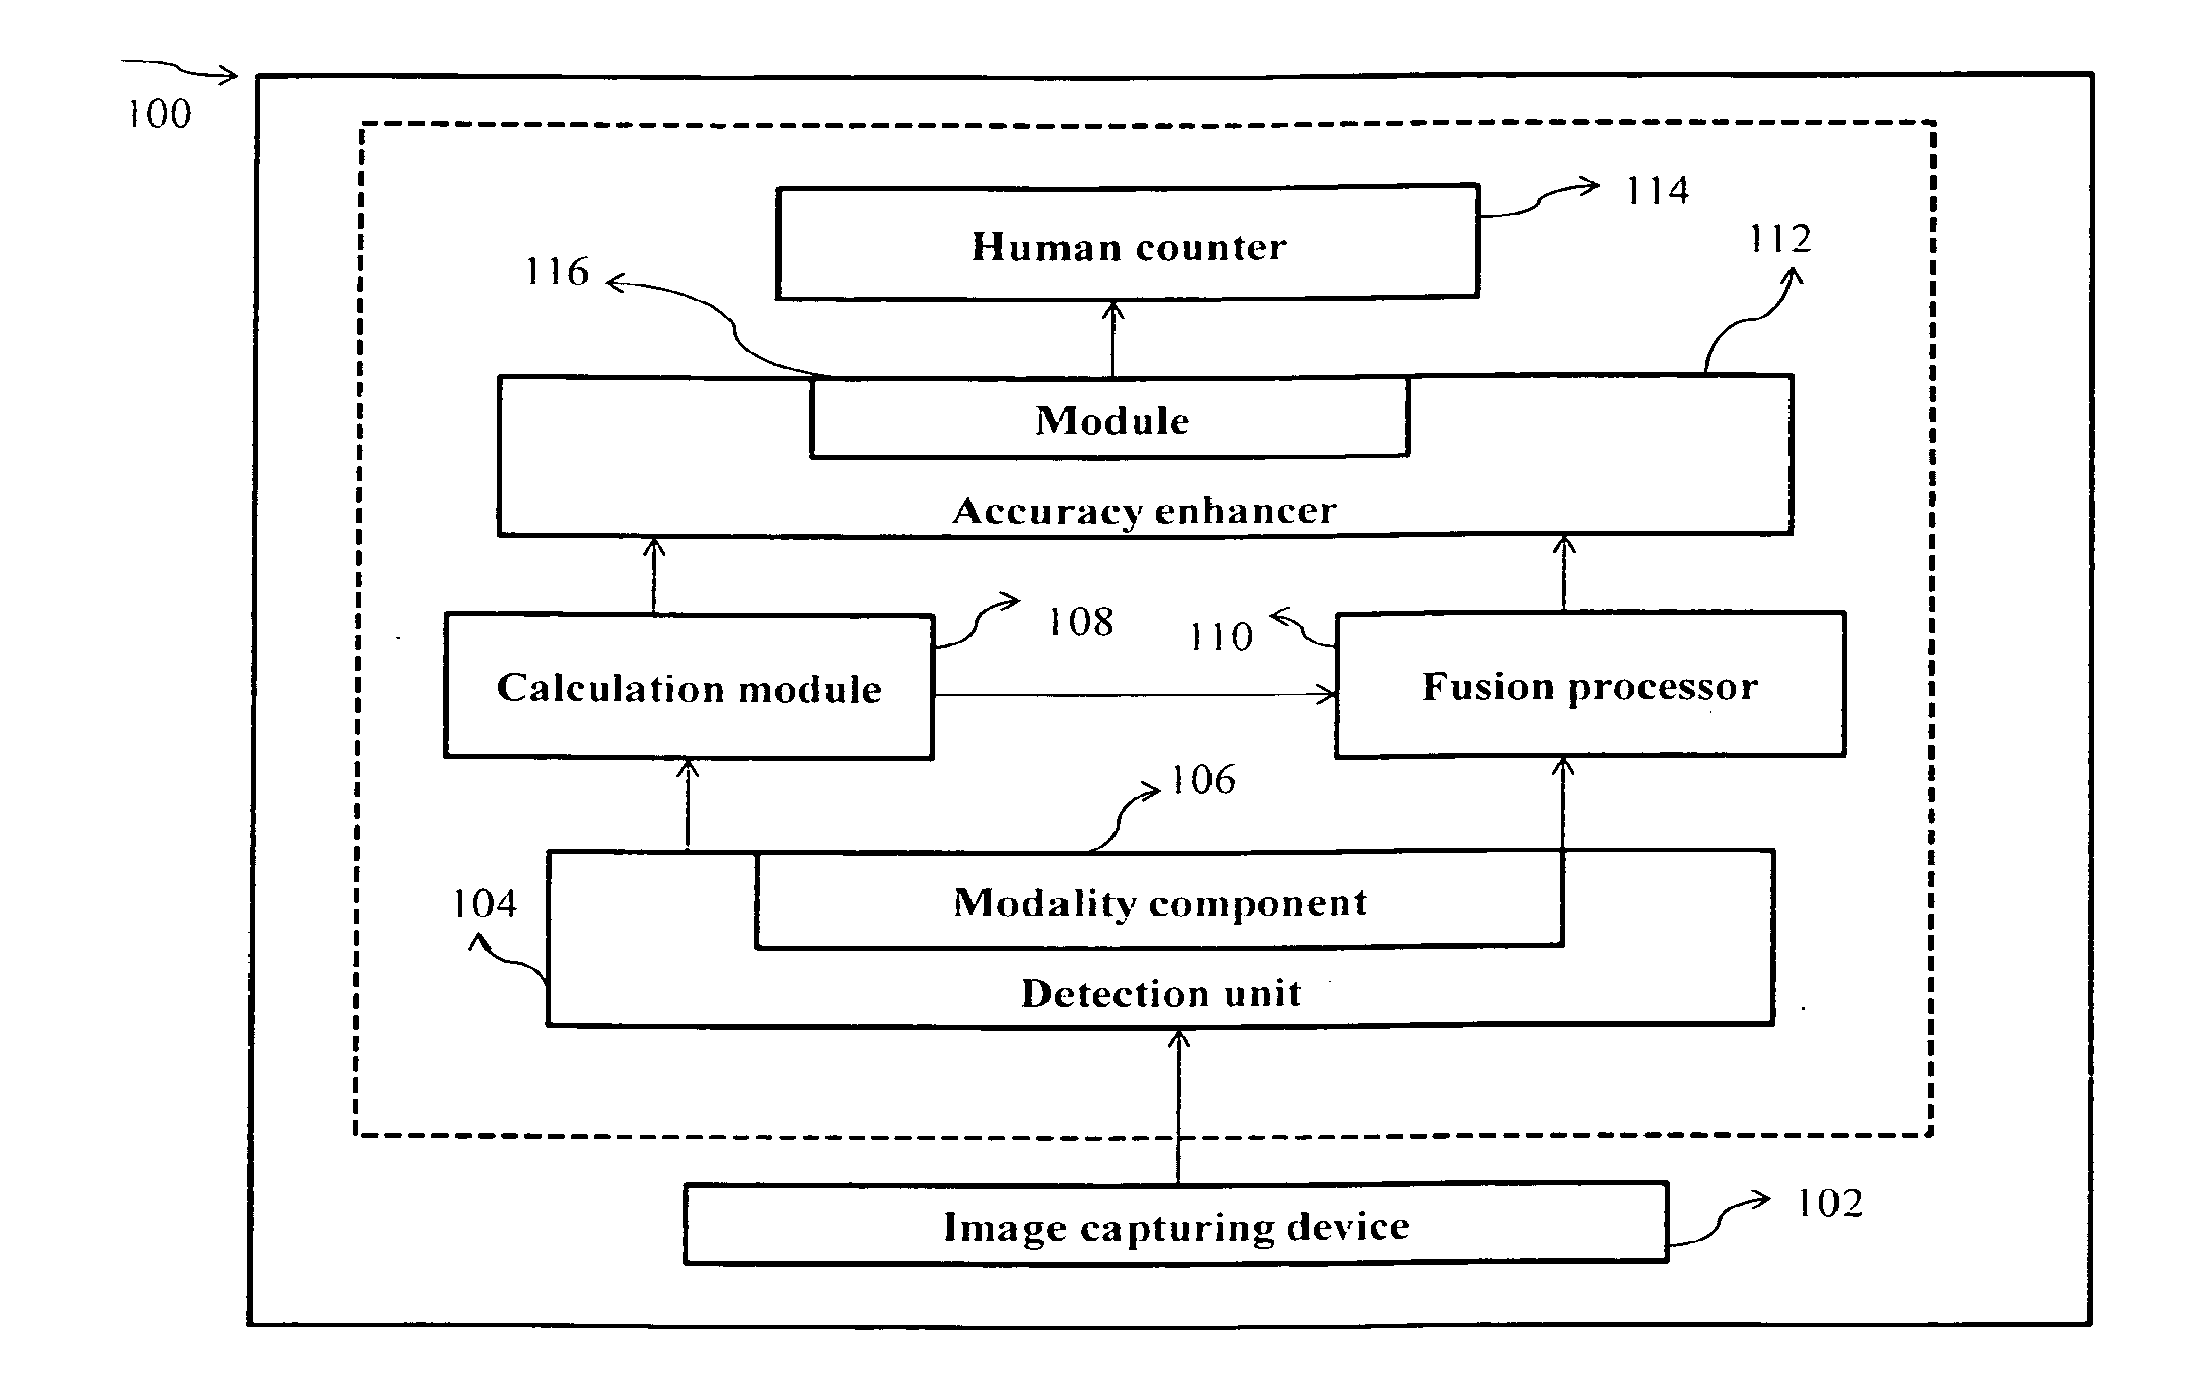 System and method for enhancing human counting by fusing results of human detection modalities